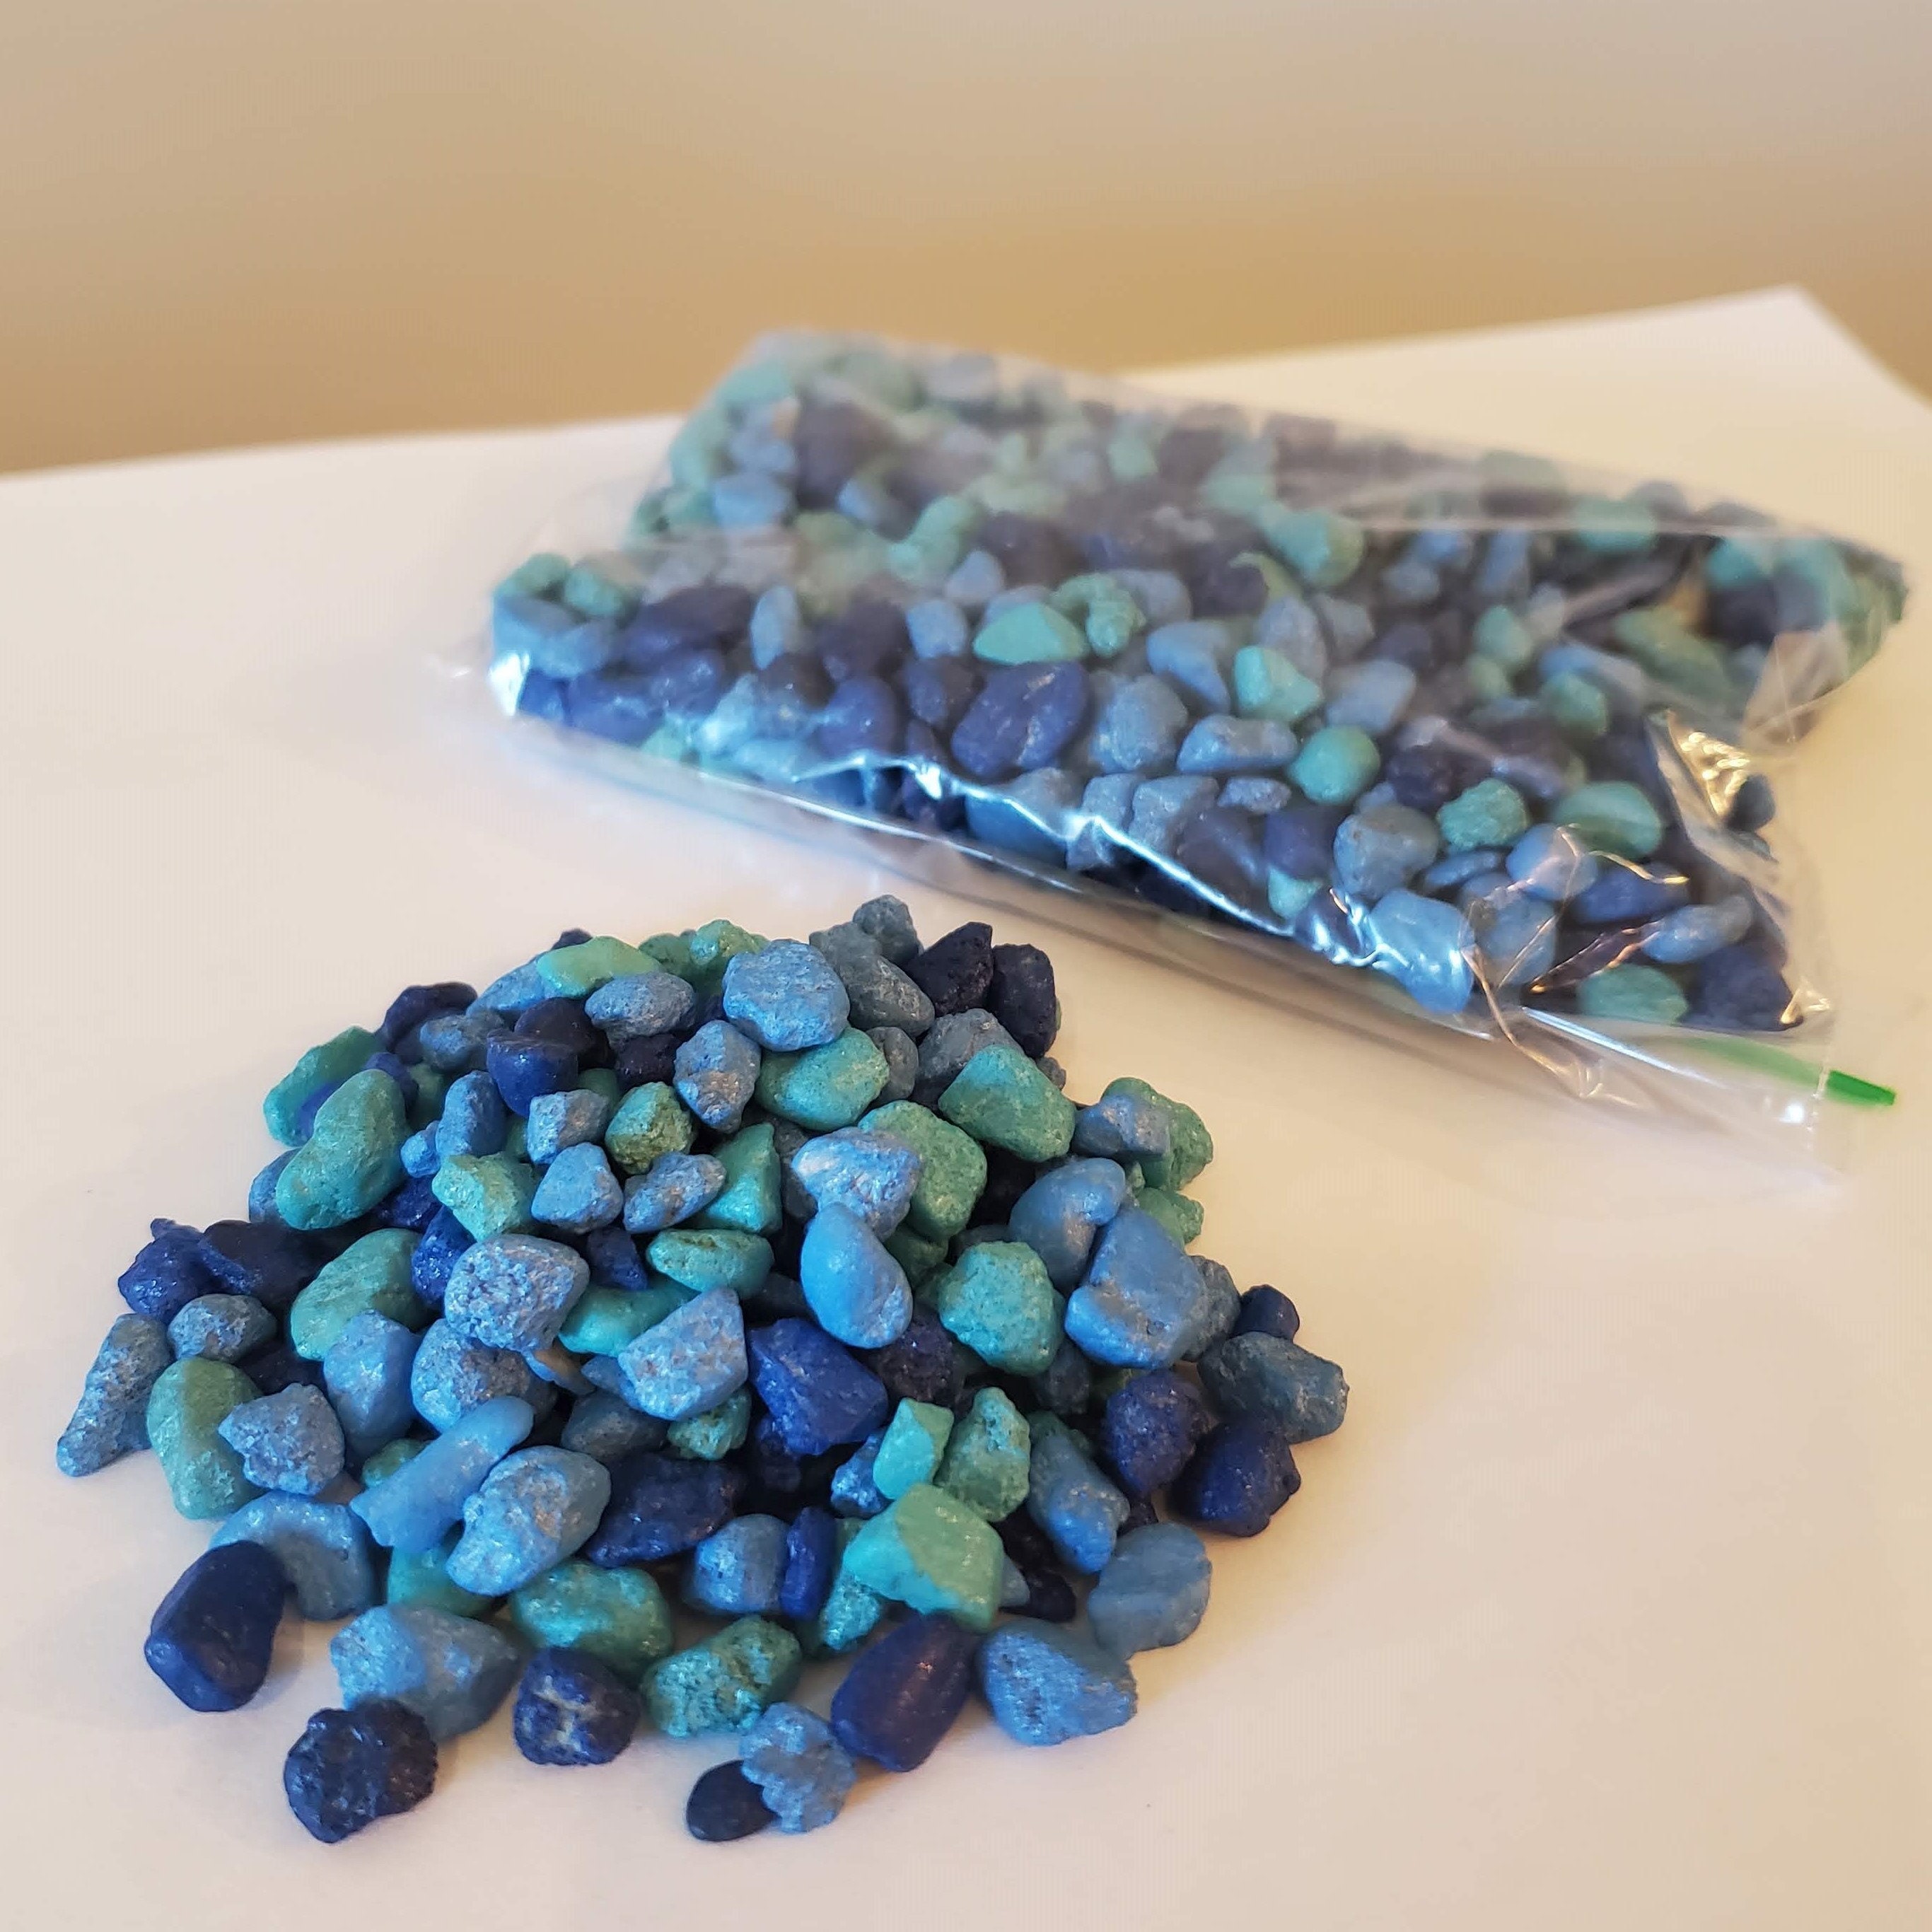 TSY TOOL 3 Lb (Approx 300 Count) 3 Bags Mixed Color Glass Gems Pebbles  Stones Flat Marbles for Vase Accents and Crafting